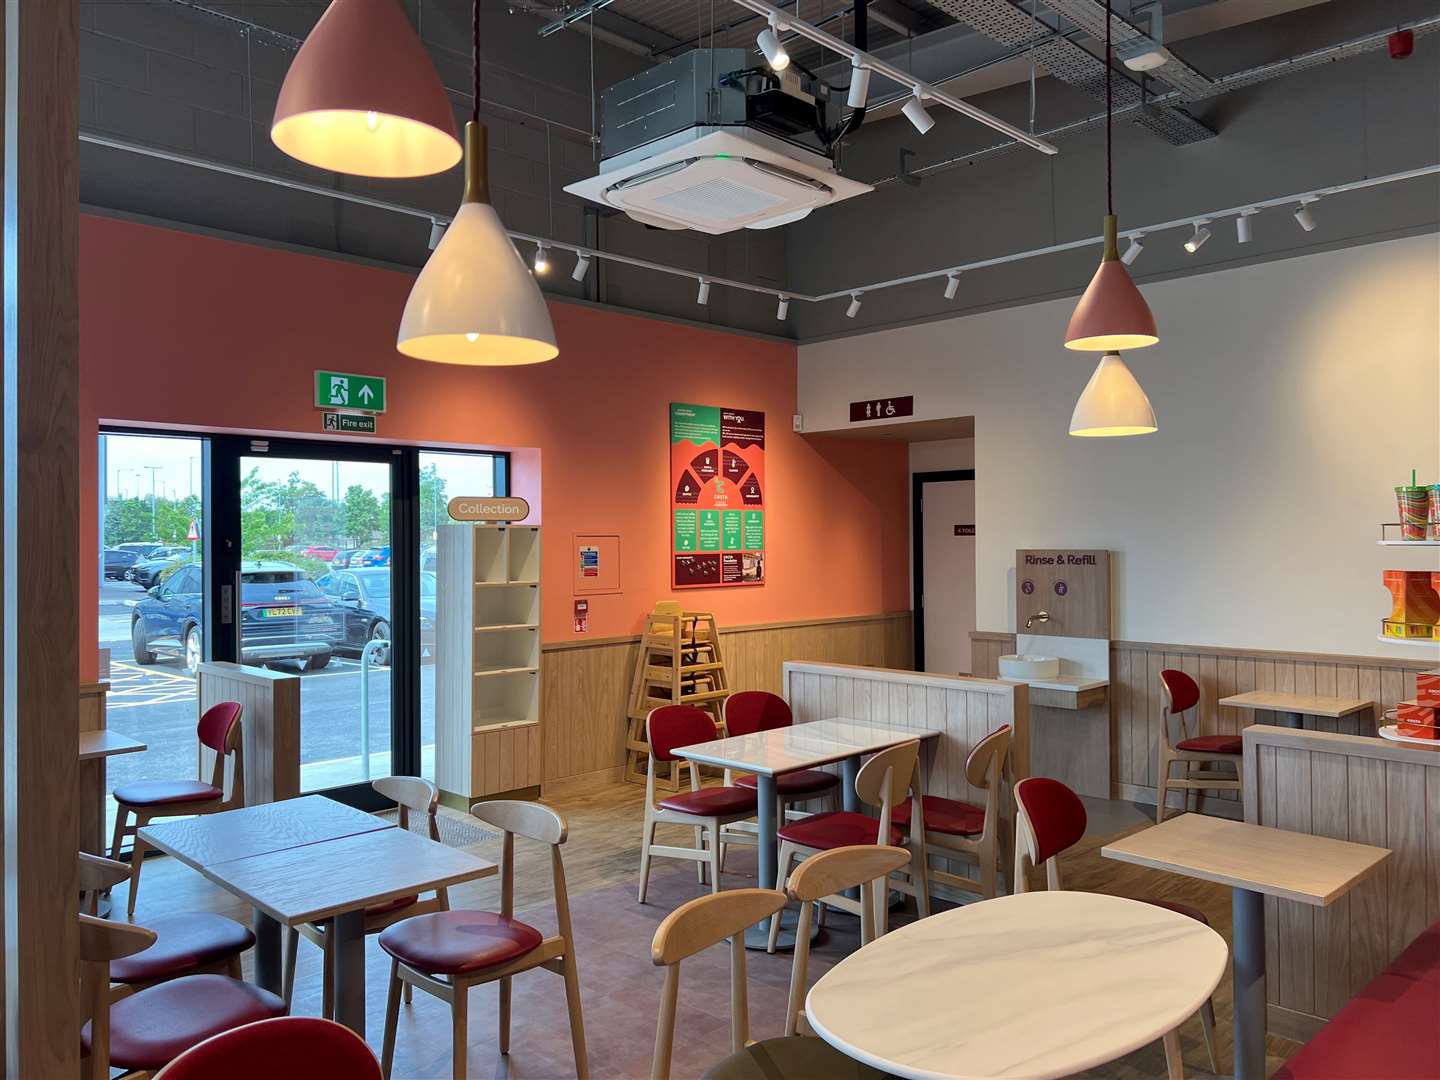 The interior of the new Costa Coffee shop